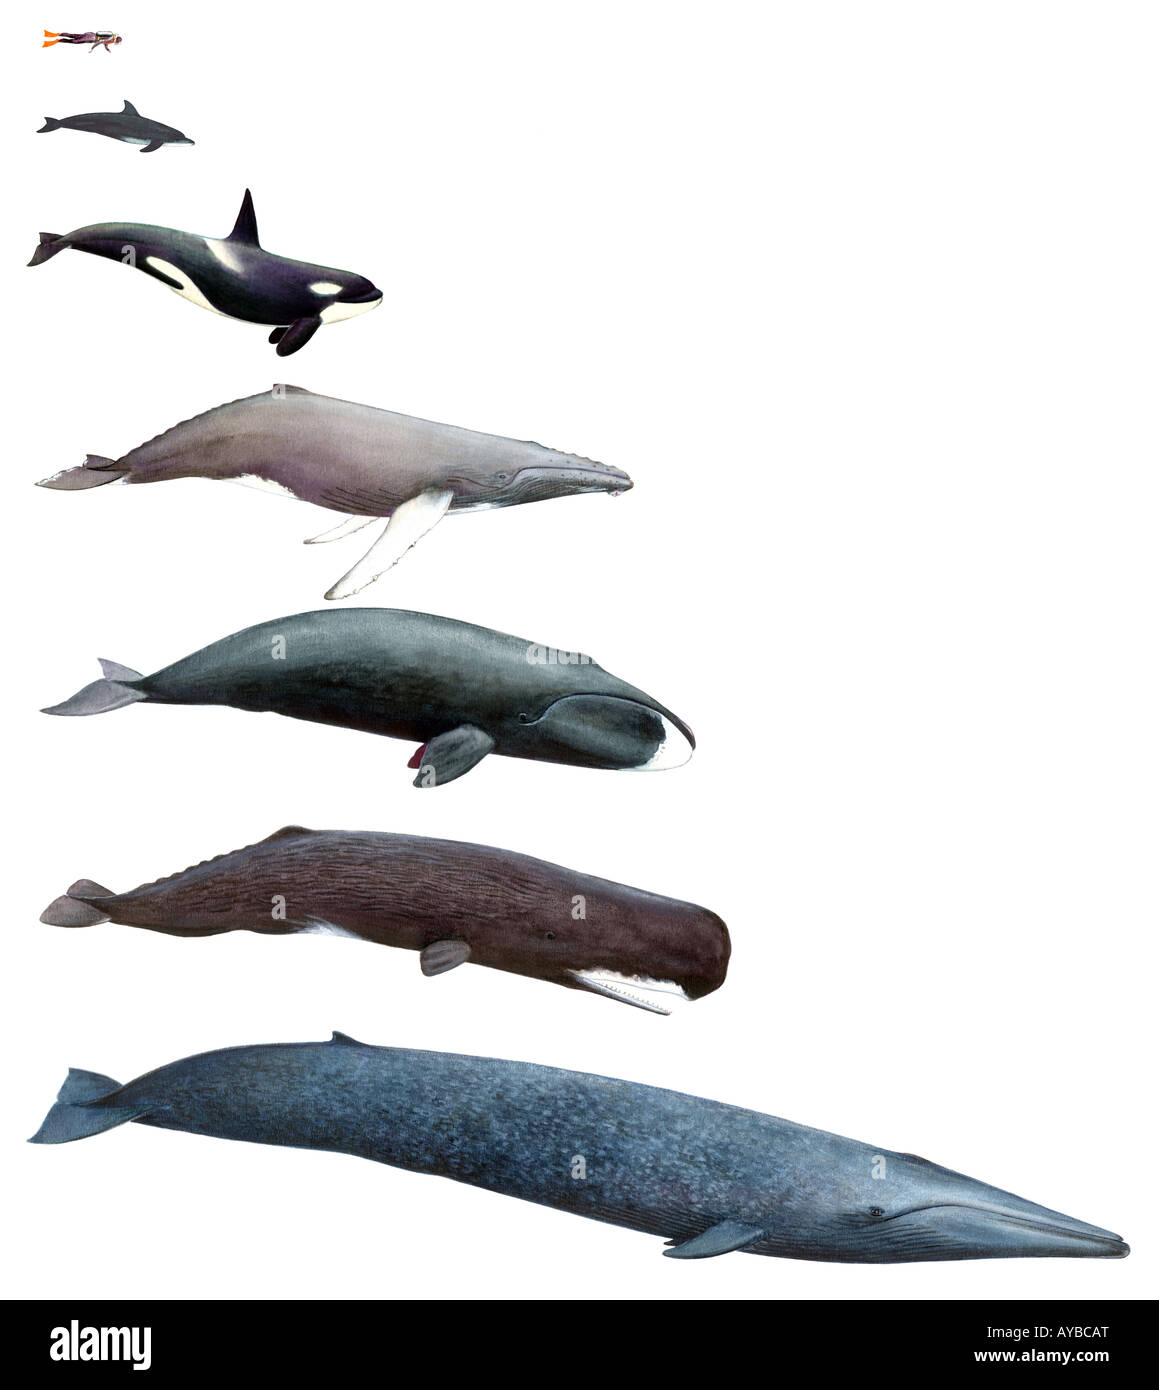 Different whales and dolphins, drawing Stock Photo